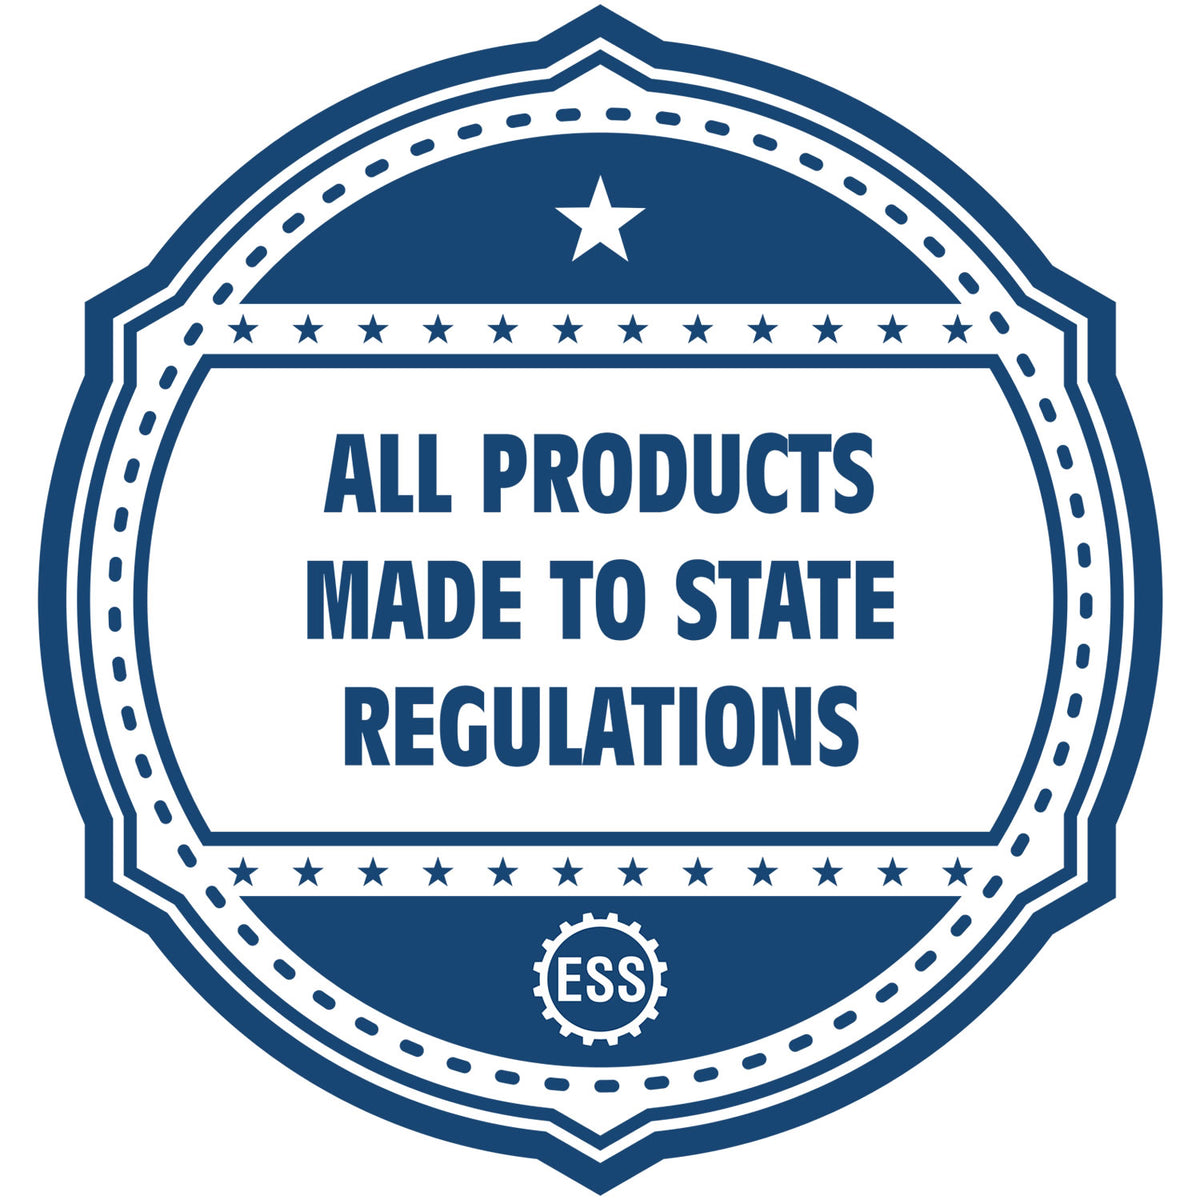 A blue icon or badge for the Self-Inking Arkansas Geologist Stamp showing that this product is made in compliance with state regulations.